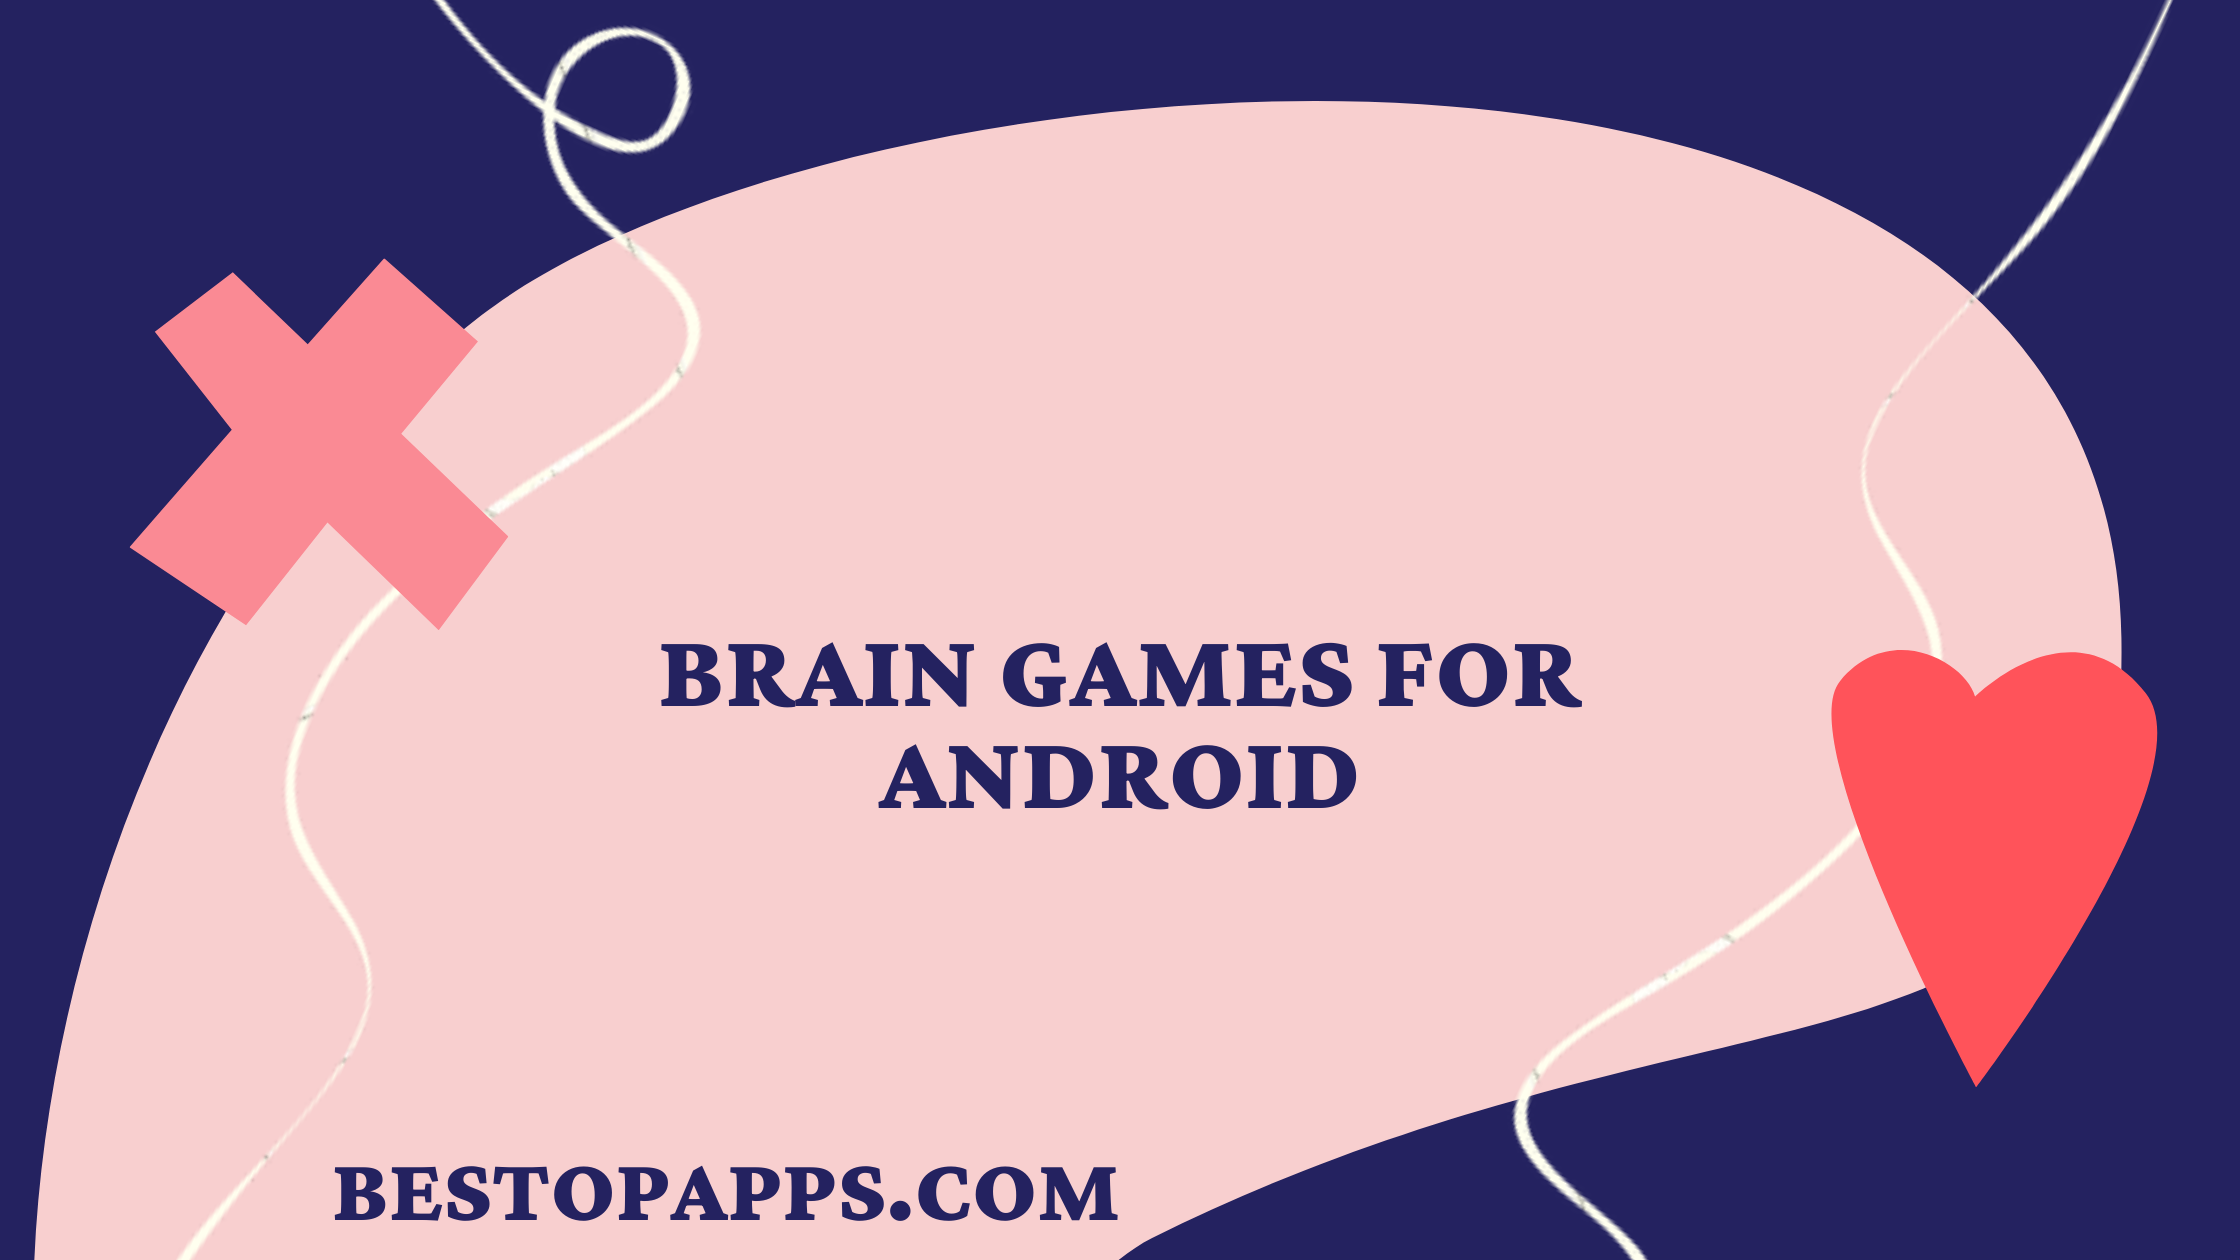 BRAIN GAMES FOR ANDROID